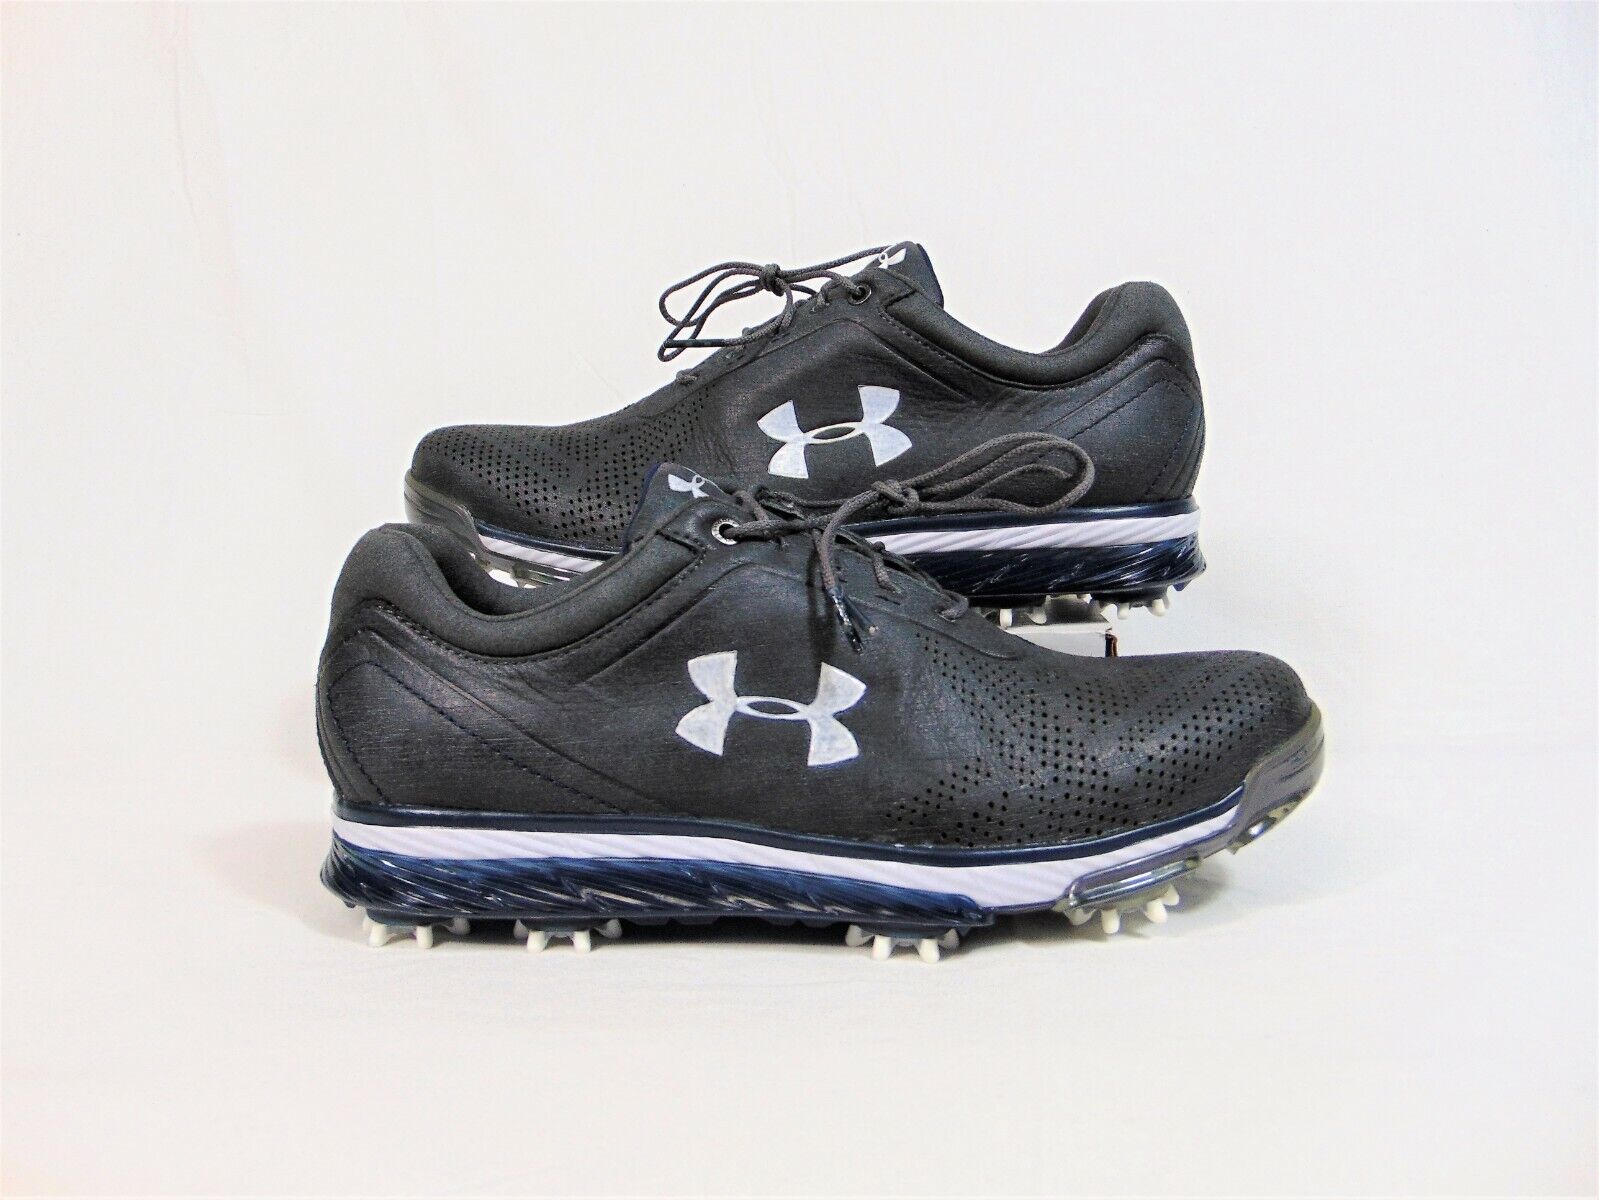 Under Armour Tempo Tour Leather Dark Gray Golf Shoes SZ 8 NEW 12